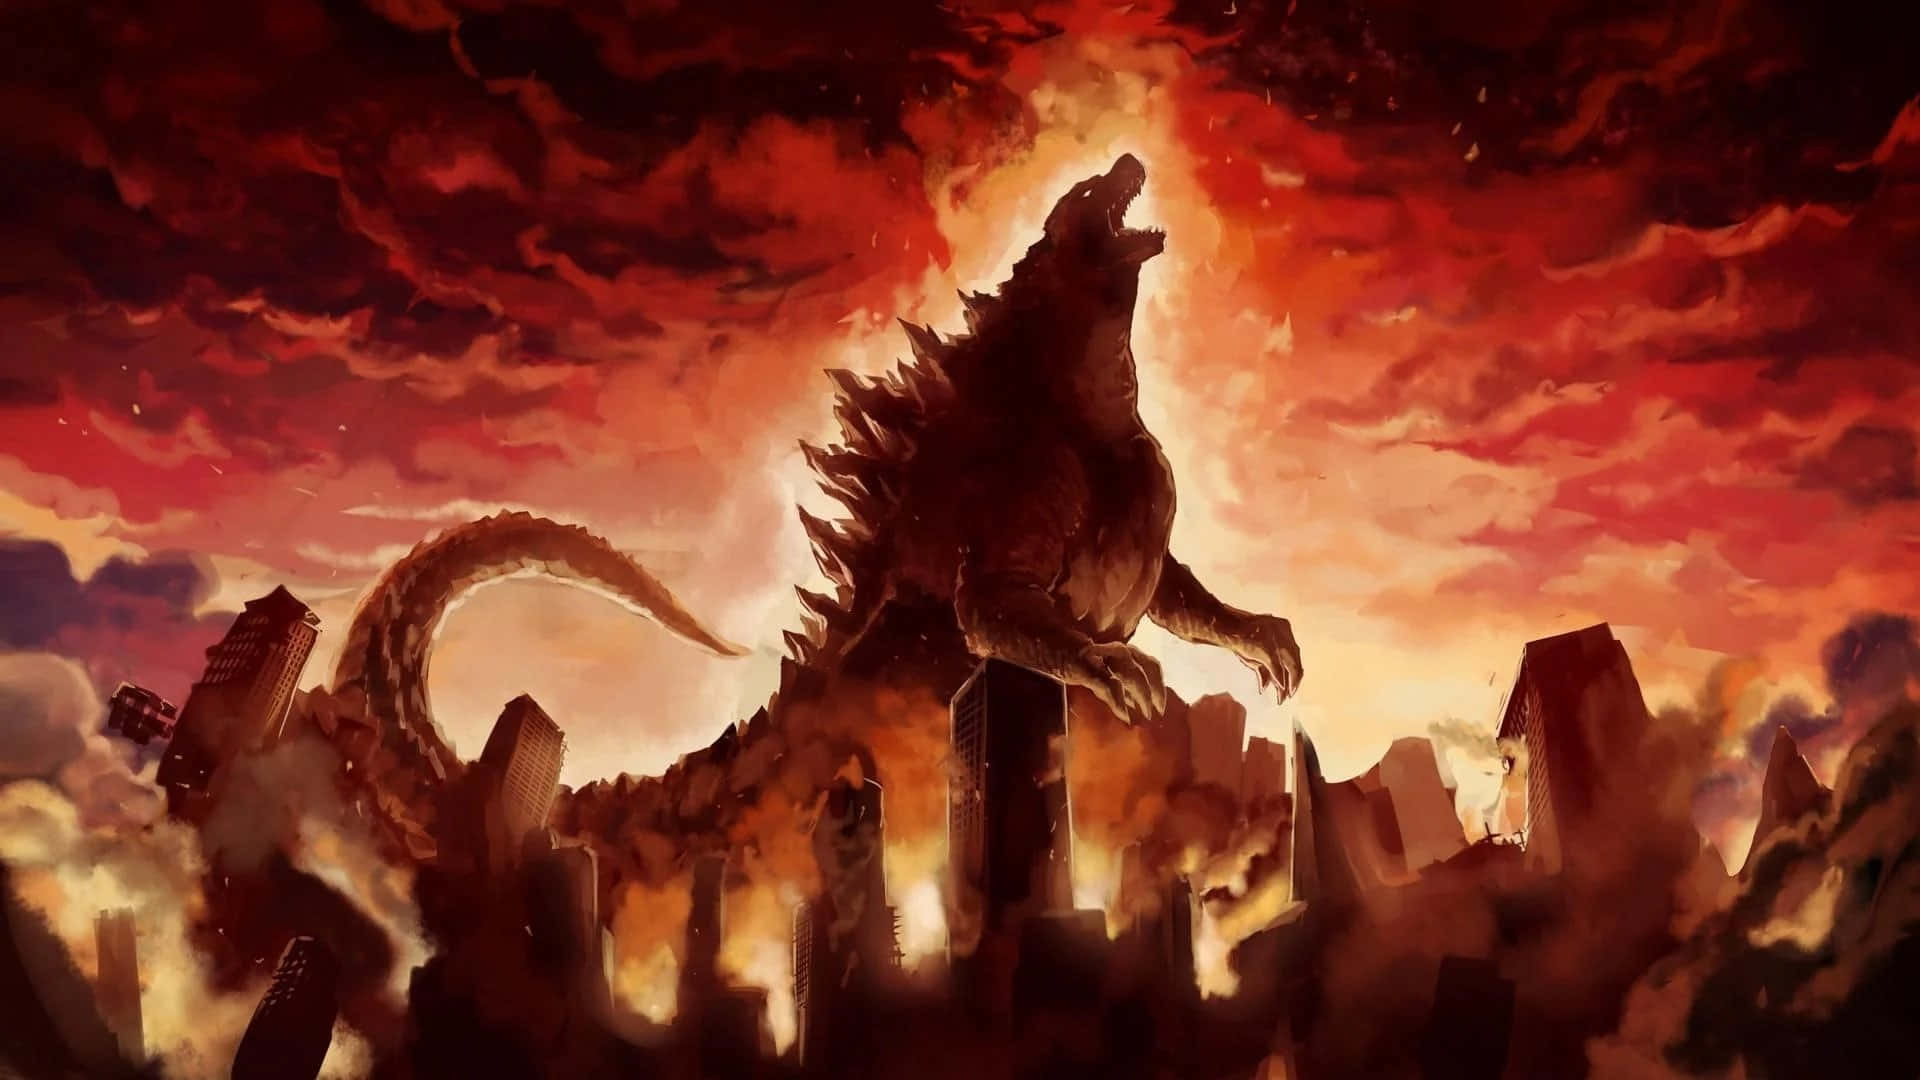 Godzilla Under Red Sky With Destroyed City Picture